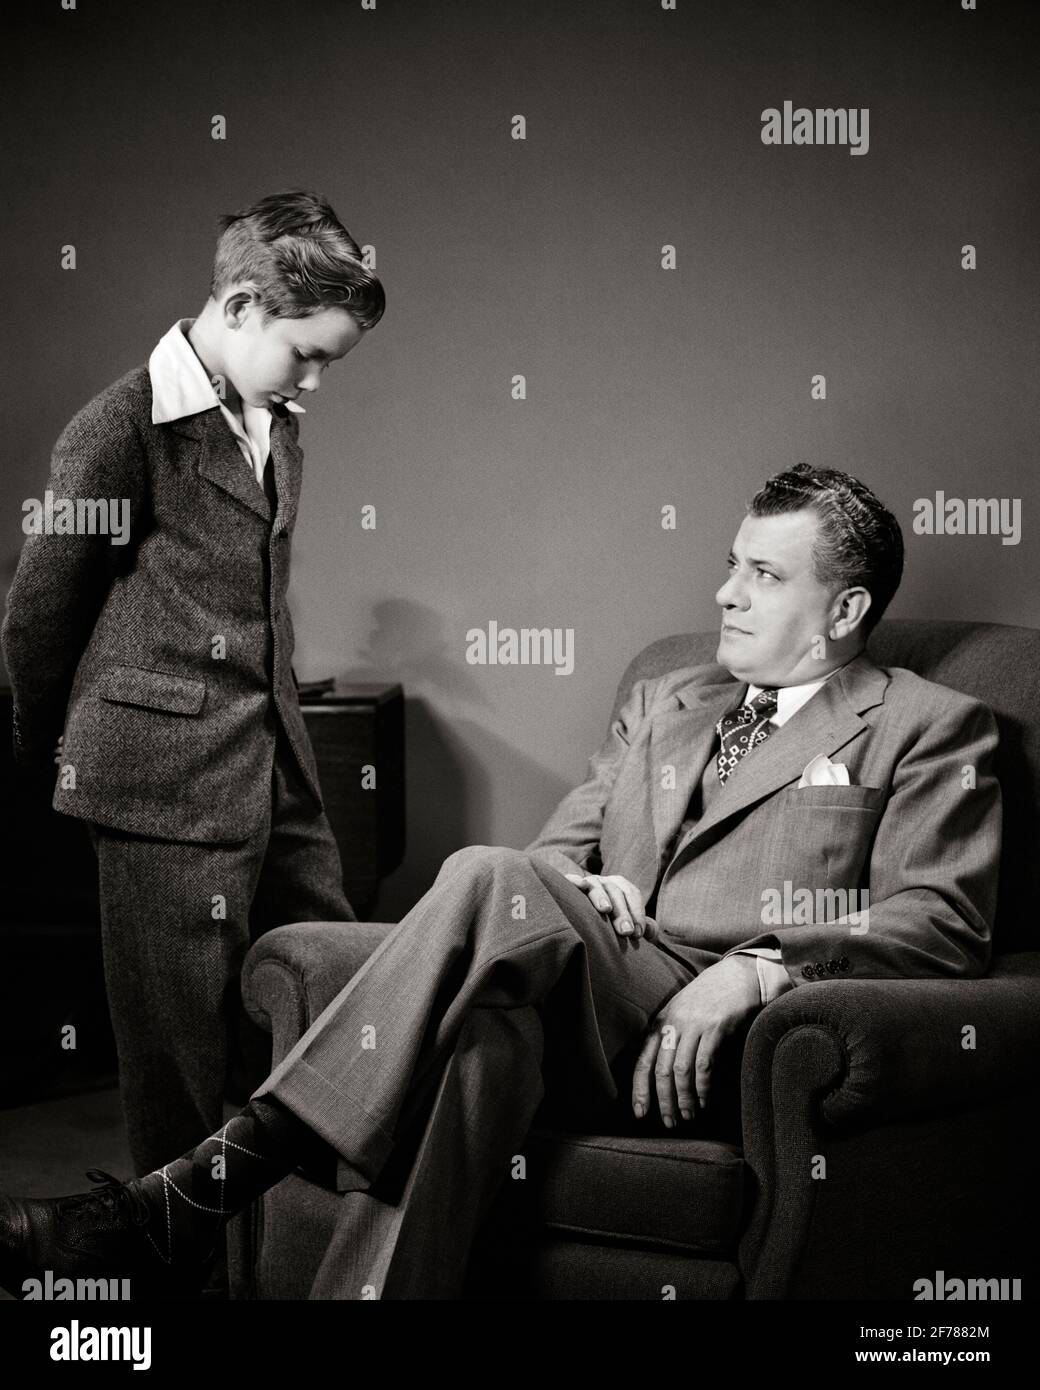 1940s MAN FATHER SEATED TALKING TO DISCIPLINING ADMONISHING PRE-TEEN BOY SON STANDING WITH HEAD BOWED ASHAMED - j4426 HAR001 HARS FACIAL ANGER COMMUNICATION STRONG SONS CONTROL FAMILIES LIFESTYLE PARENTING STUDIO SHOT HOME LIFE SEATED COPY SPACE FRIENDSHIP HALF-LENGTH PERSONS DISCIPLINE CARING MALES TEENAGE BOY EXPRESSIONS FATHERS B&W LECTURE HIGH ANGLE HIS SORRY DADS AUTHORITY DISCIPLINED RULES ASHAMED CONCEPTUAL TEENAGED OBEY PERSONAL ATTACHMENT AFFECTION BEHAVIOR BOWED EMOTION JUVENILES MID-ADULT MID-ADULT MAN OBEDIENCE PARENTAL PRE-TEEN PRE-TEEN BOY SCOLD TOGETHERNESS BLACK AND WHITE Stock Photo